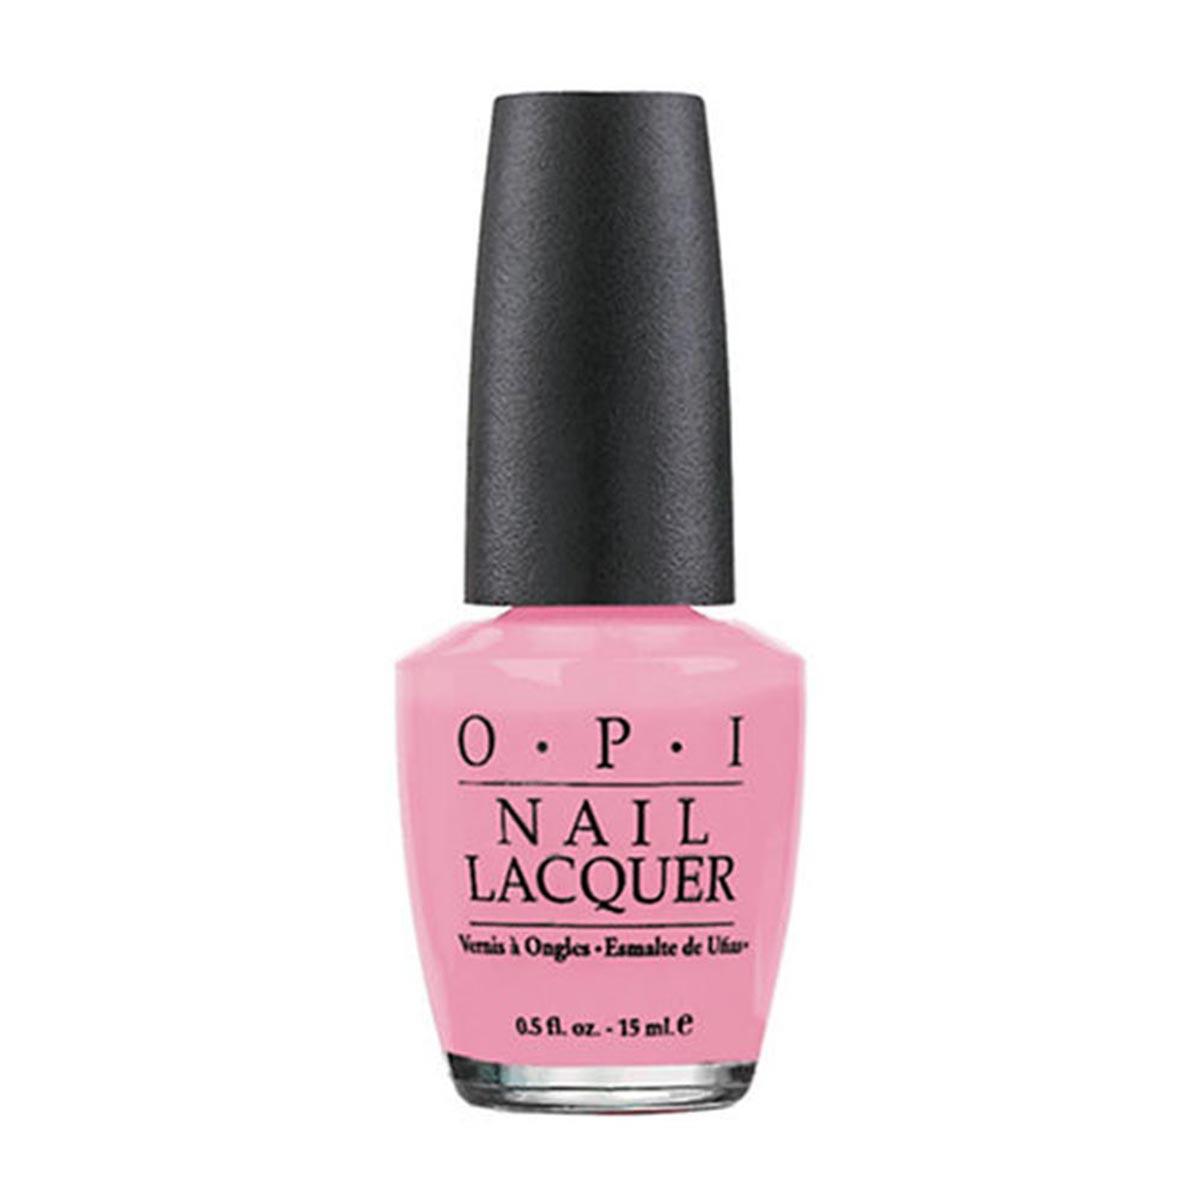 opi-nail-lacquer-nlh39-it-s-a-girl